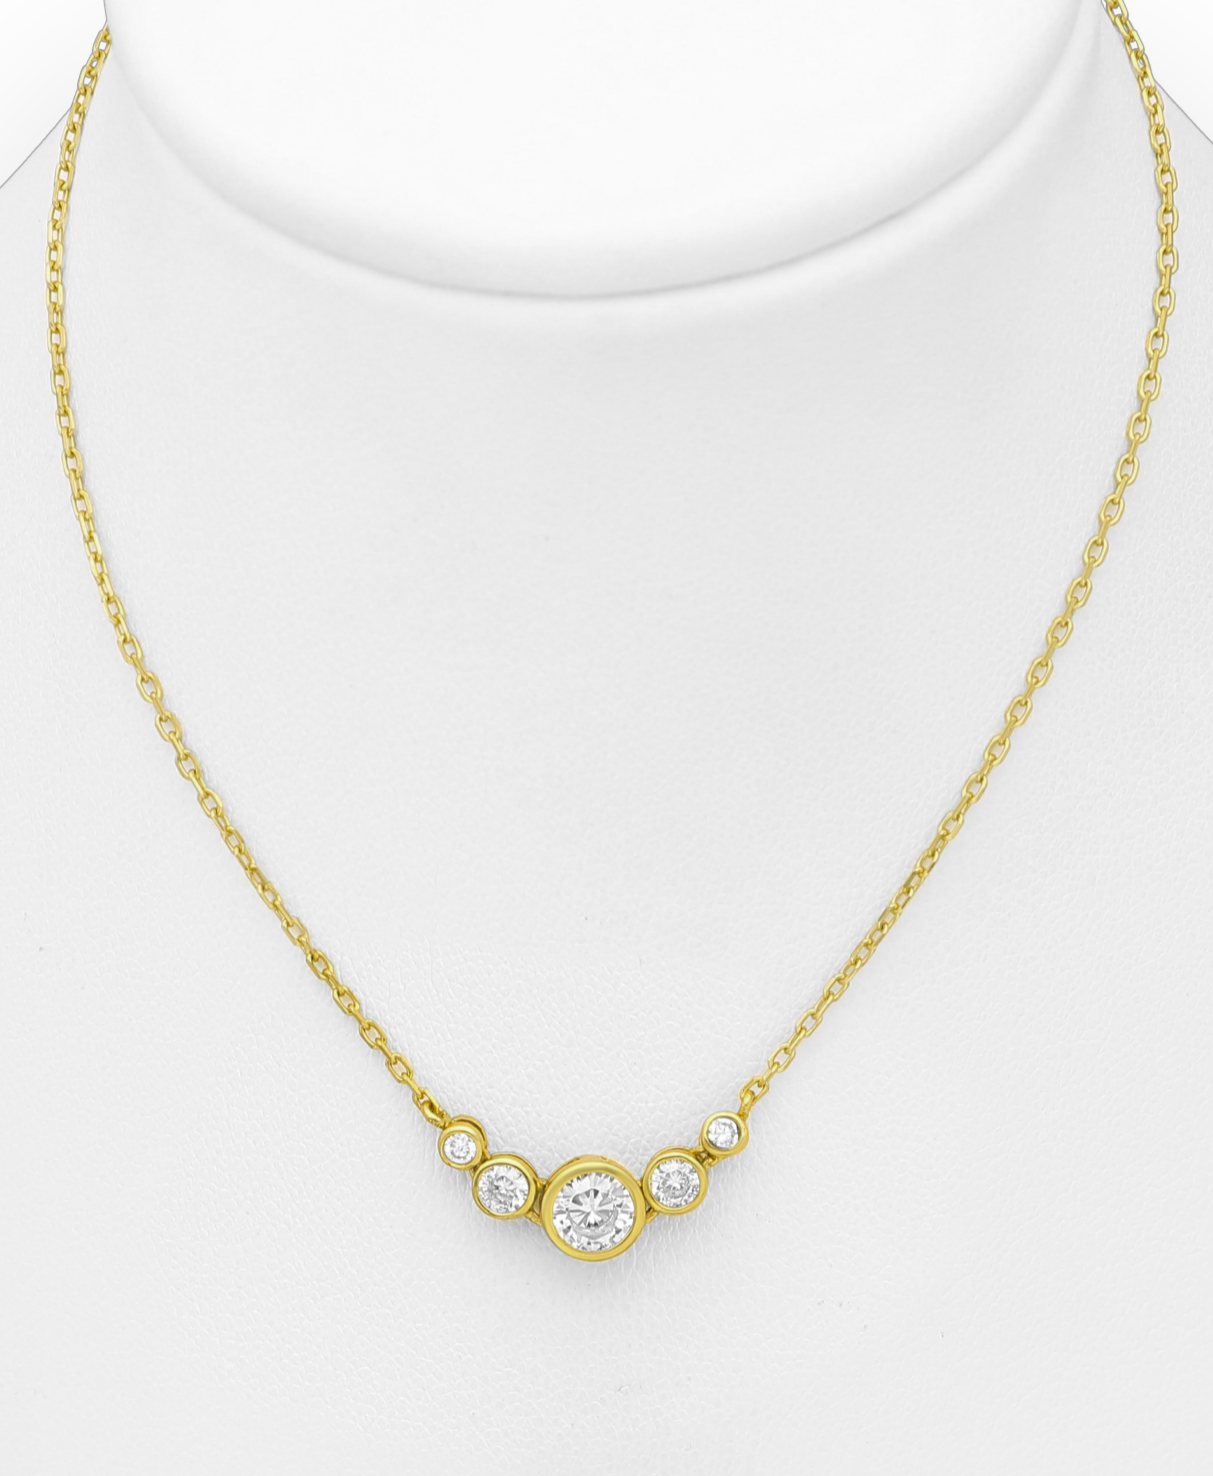 Gold Vermeil 18K Necklace with CZ Simulated Diamonds